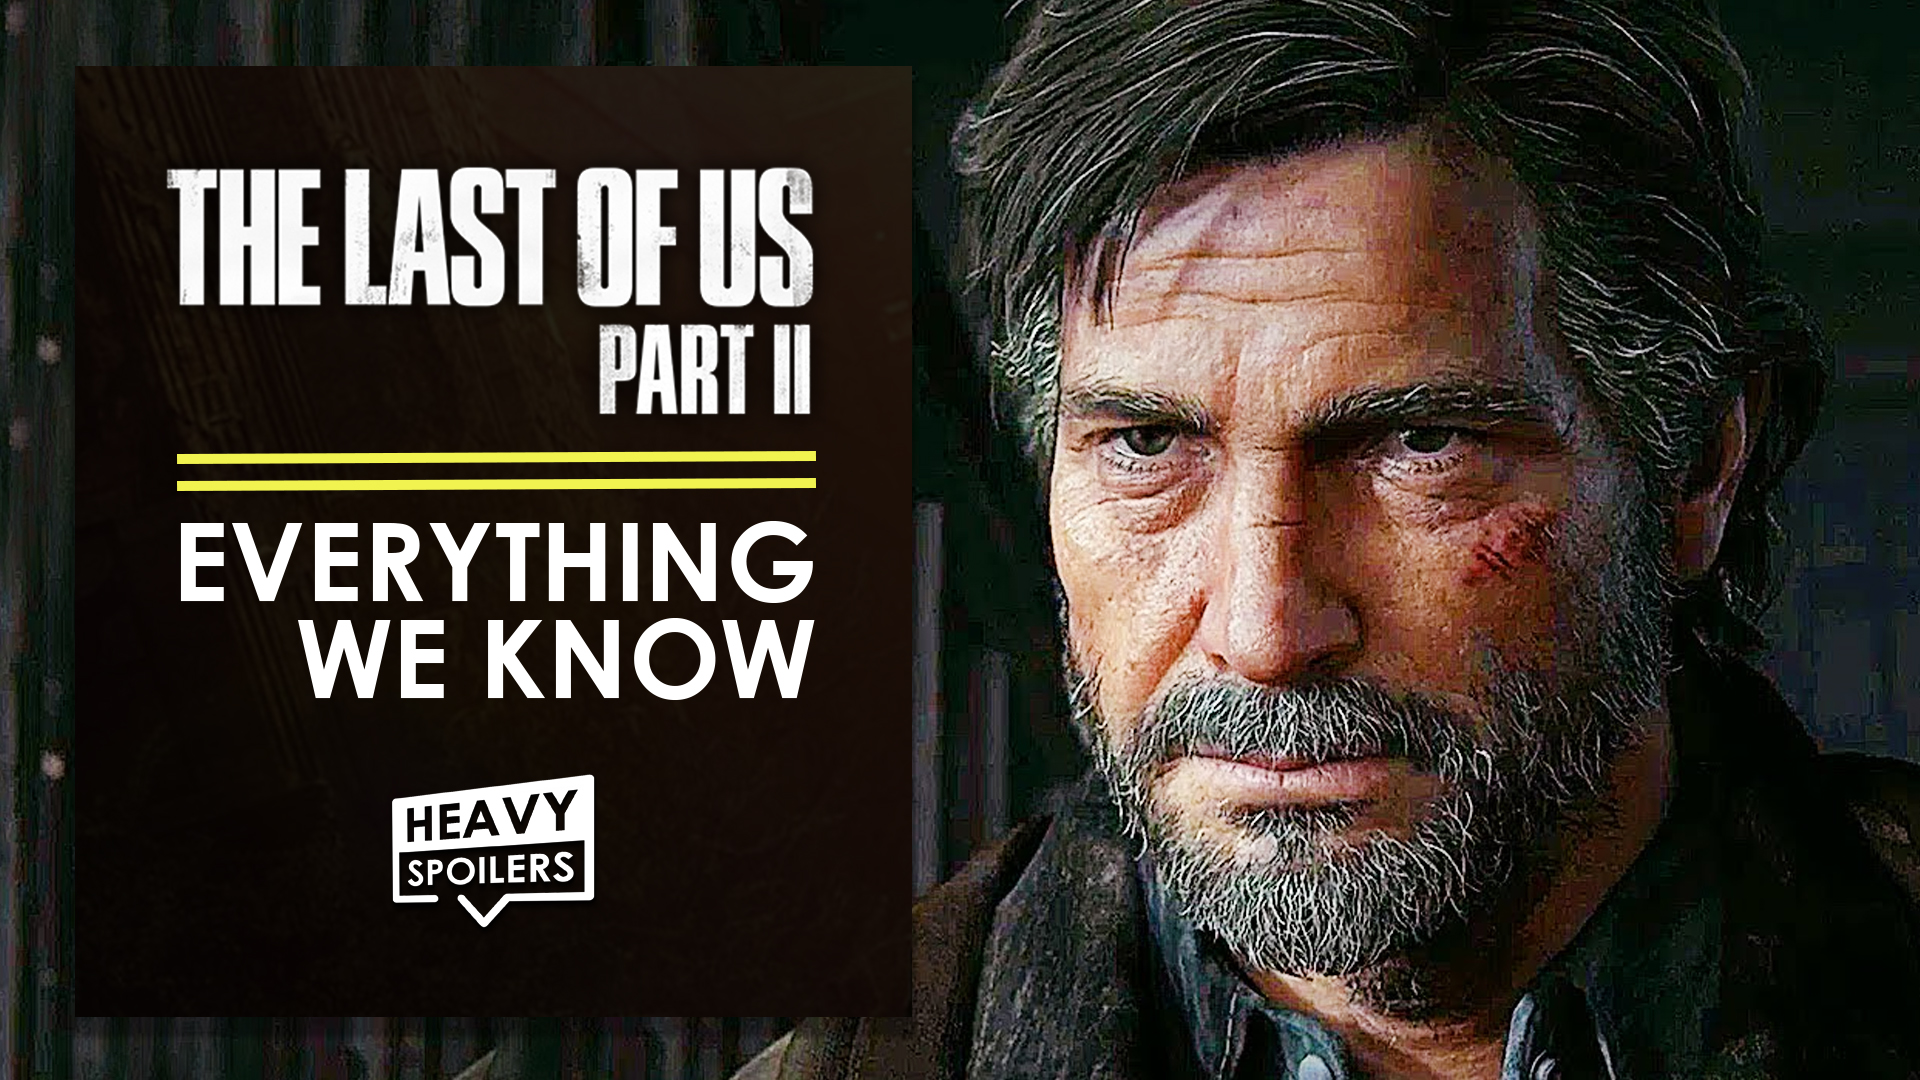 the last of us part 2 everything we know so far new trailer release date plot and storyline multiplayer spoilers review ghost joel is death fan theory ellie